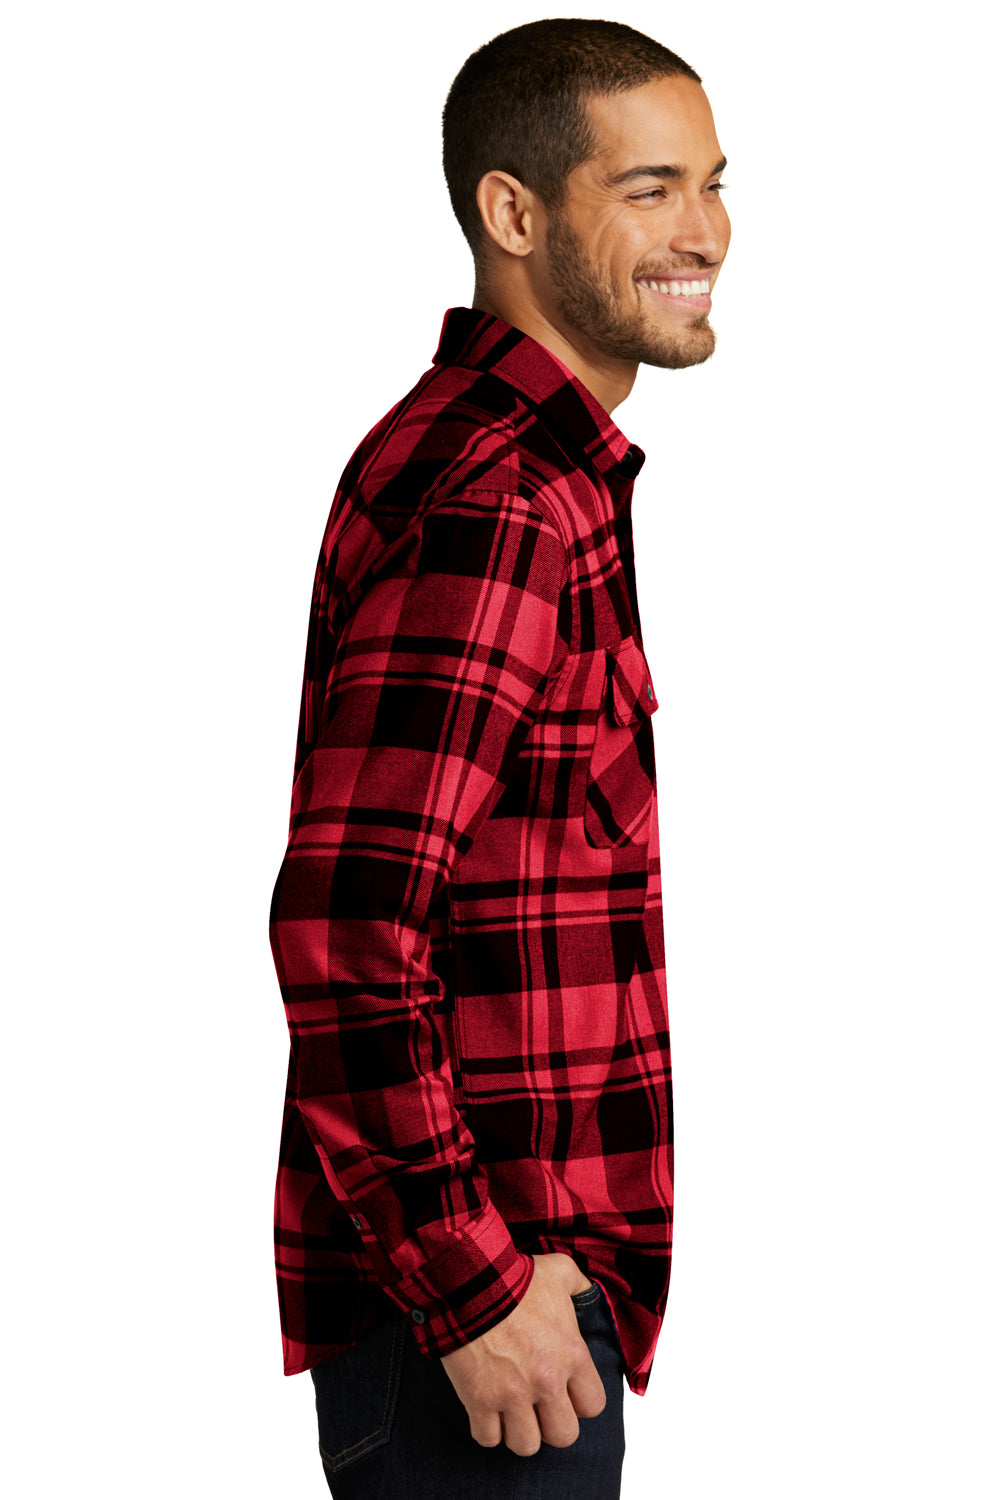 Port Authority W668 Mens Flannel Long Sleeve Button Down Shirt w/ Double Pockets Red/Black Side